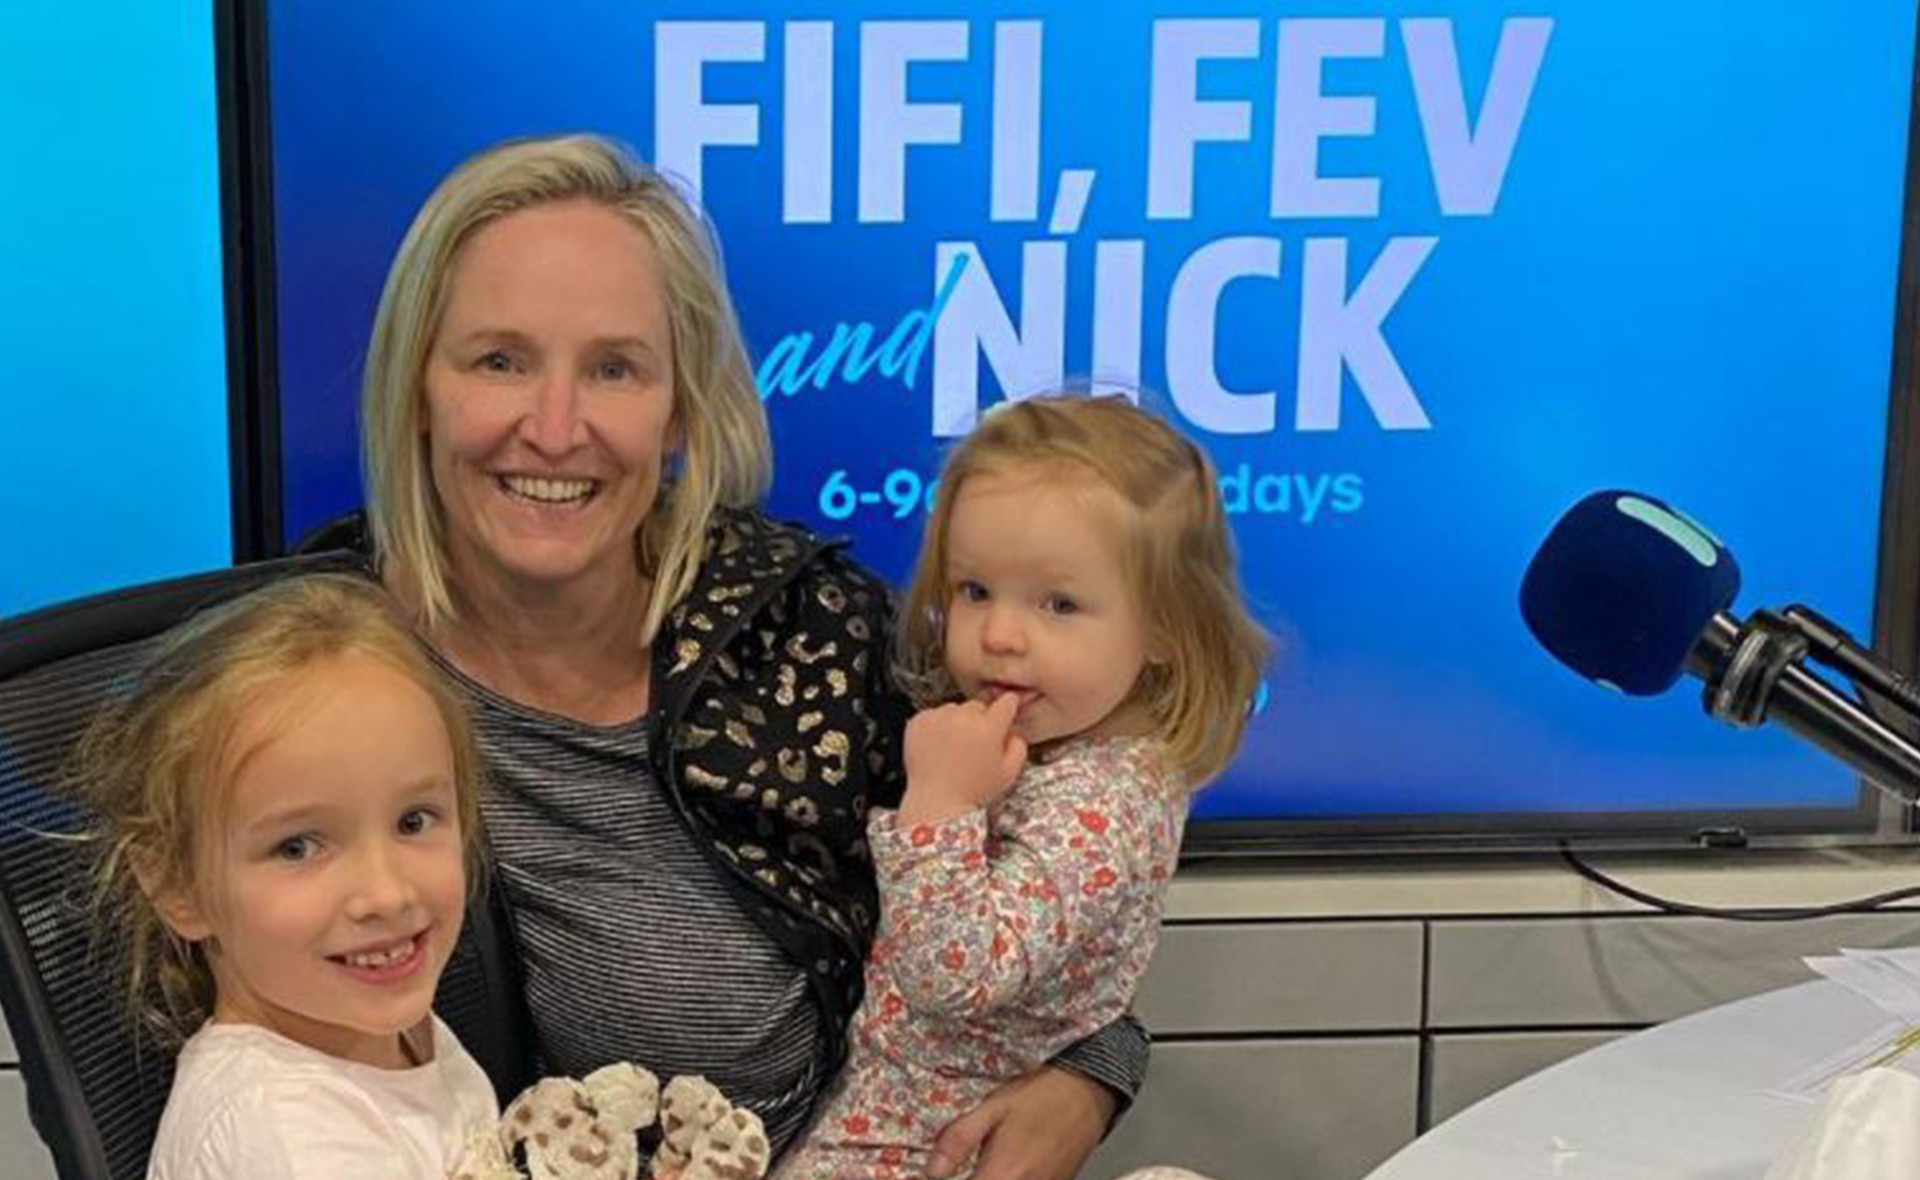 She is still young, but Fifi Box’s daughter Trixie Belle may have already found her calling – as she looks to Brendan Fevola for inspiration